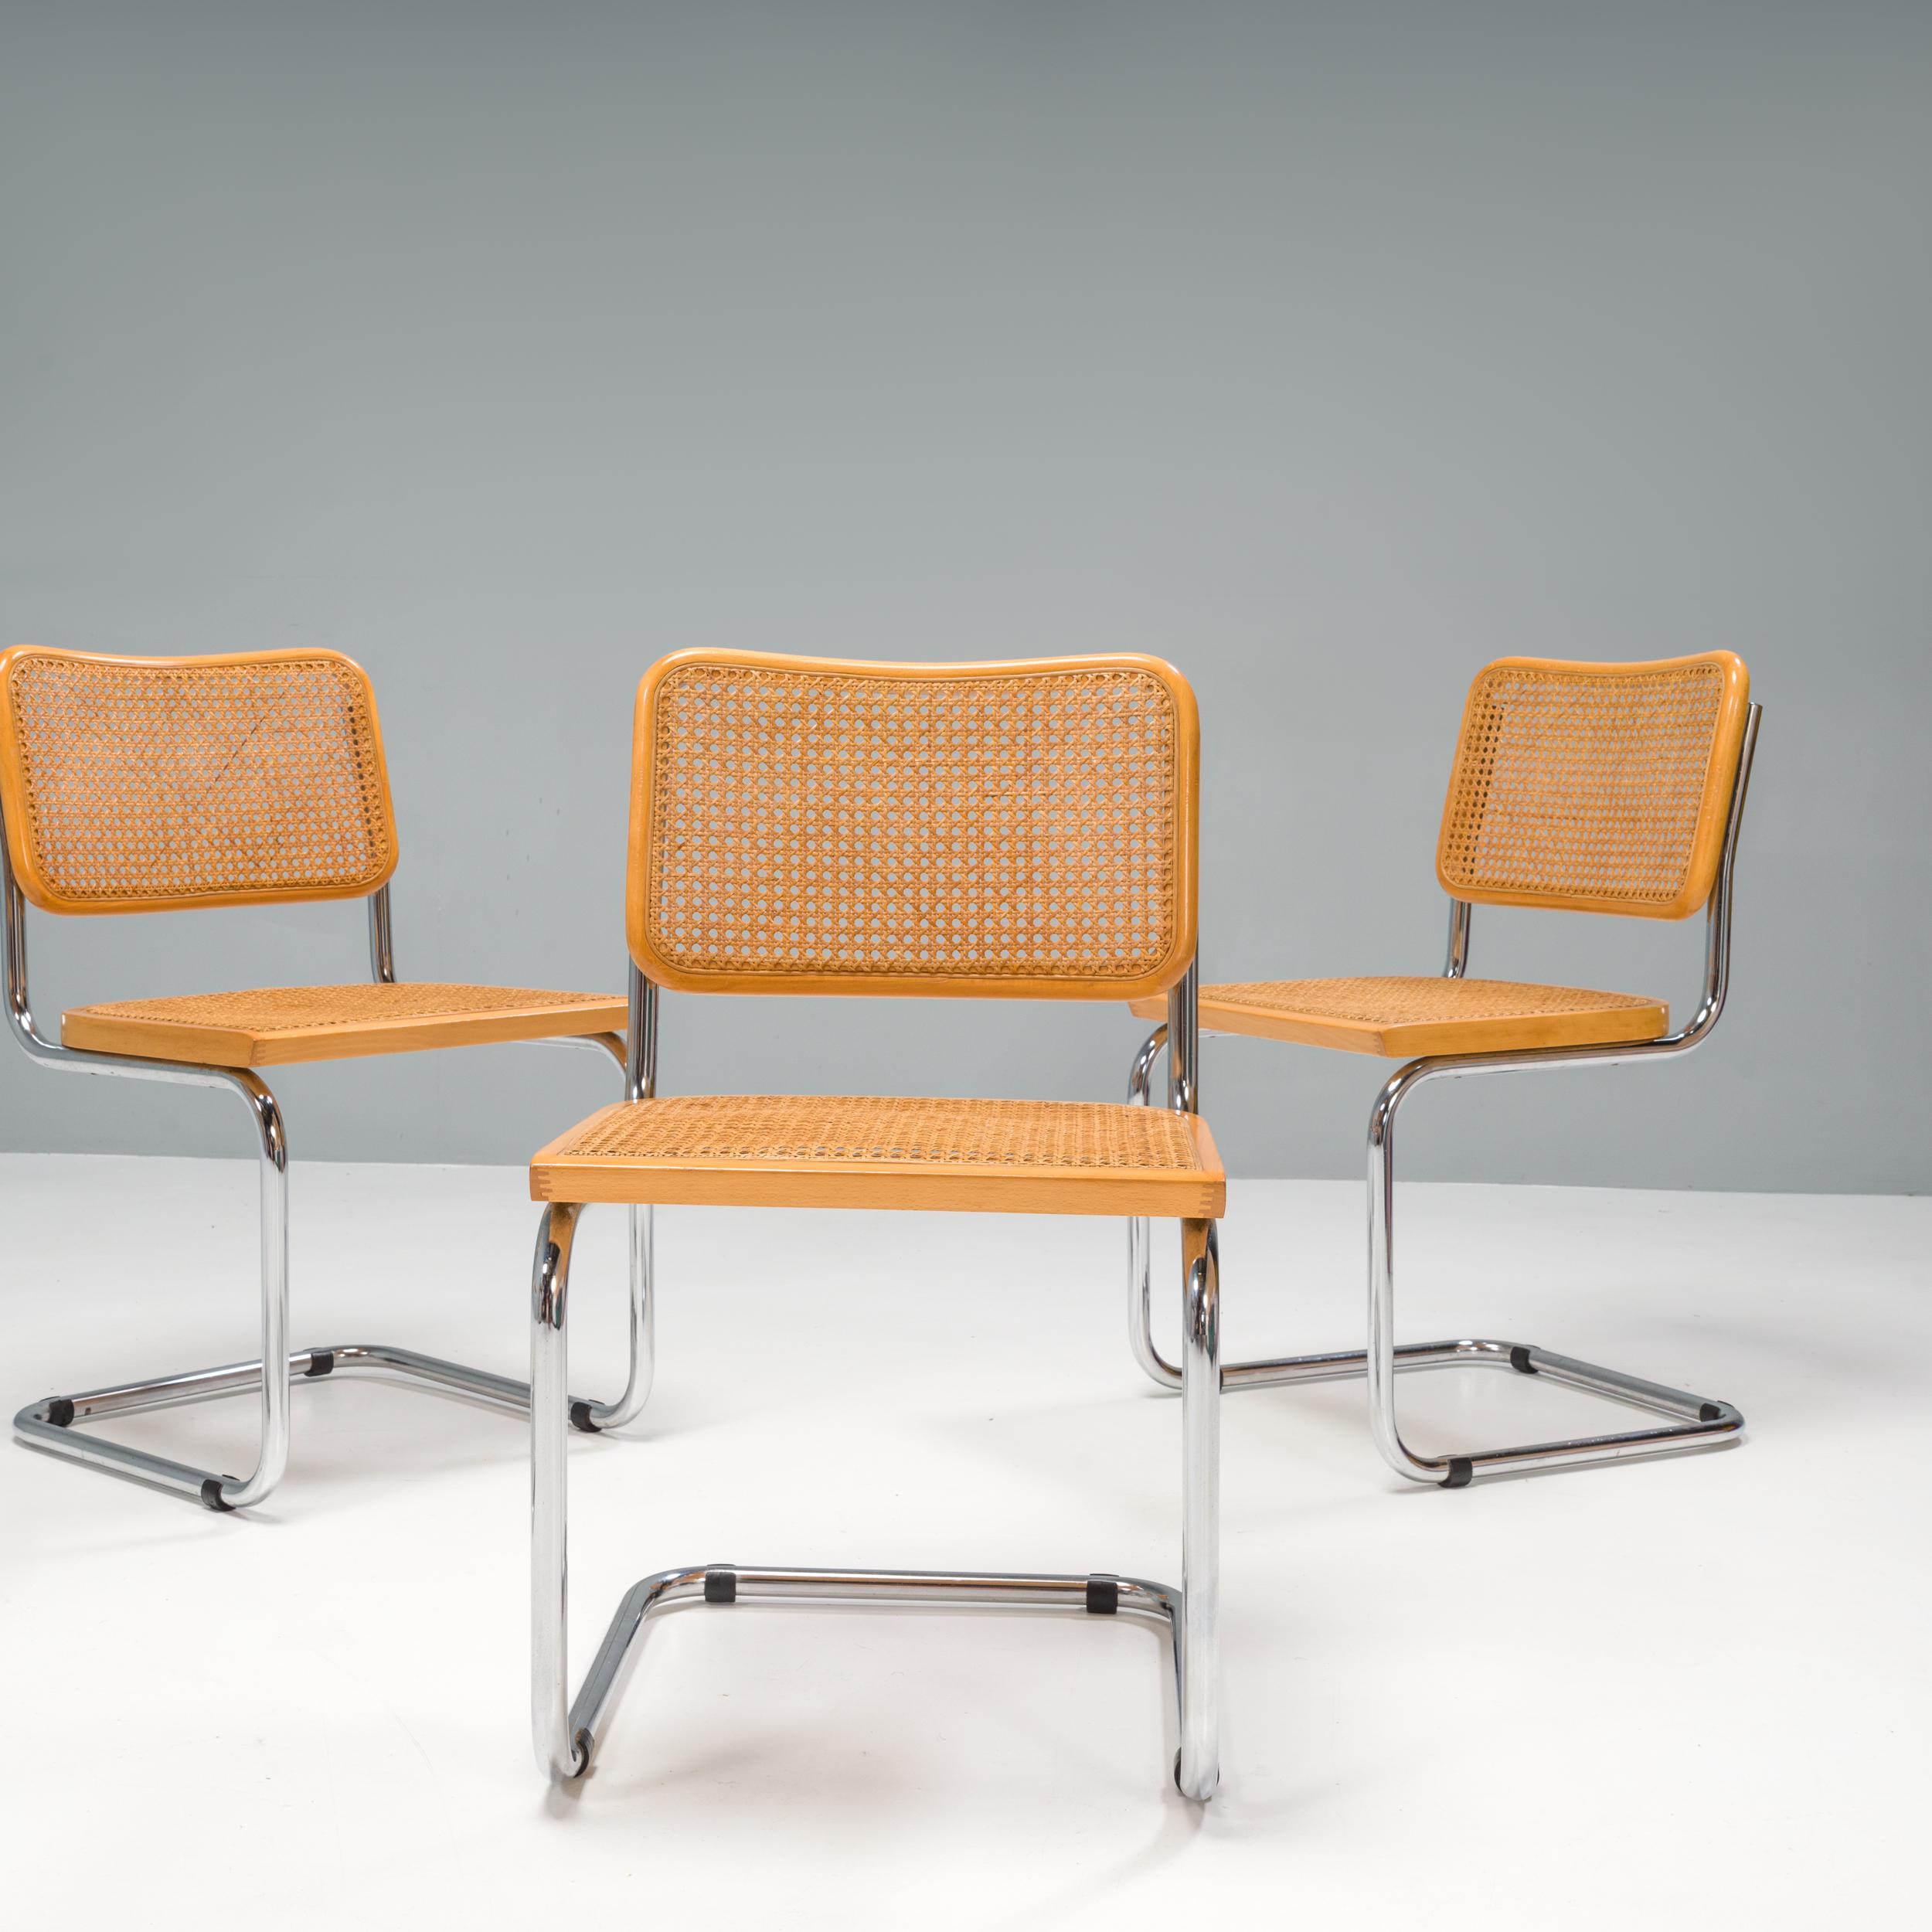 Italian Marcel Breuer by Knoll Cane Cesca Chairs, Set of 4